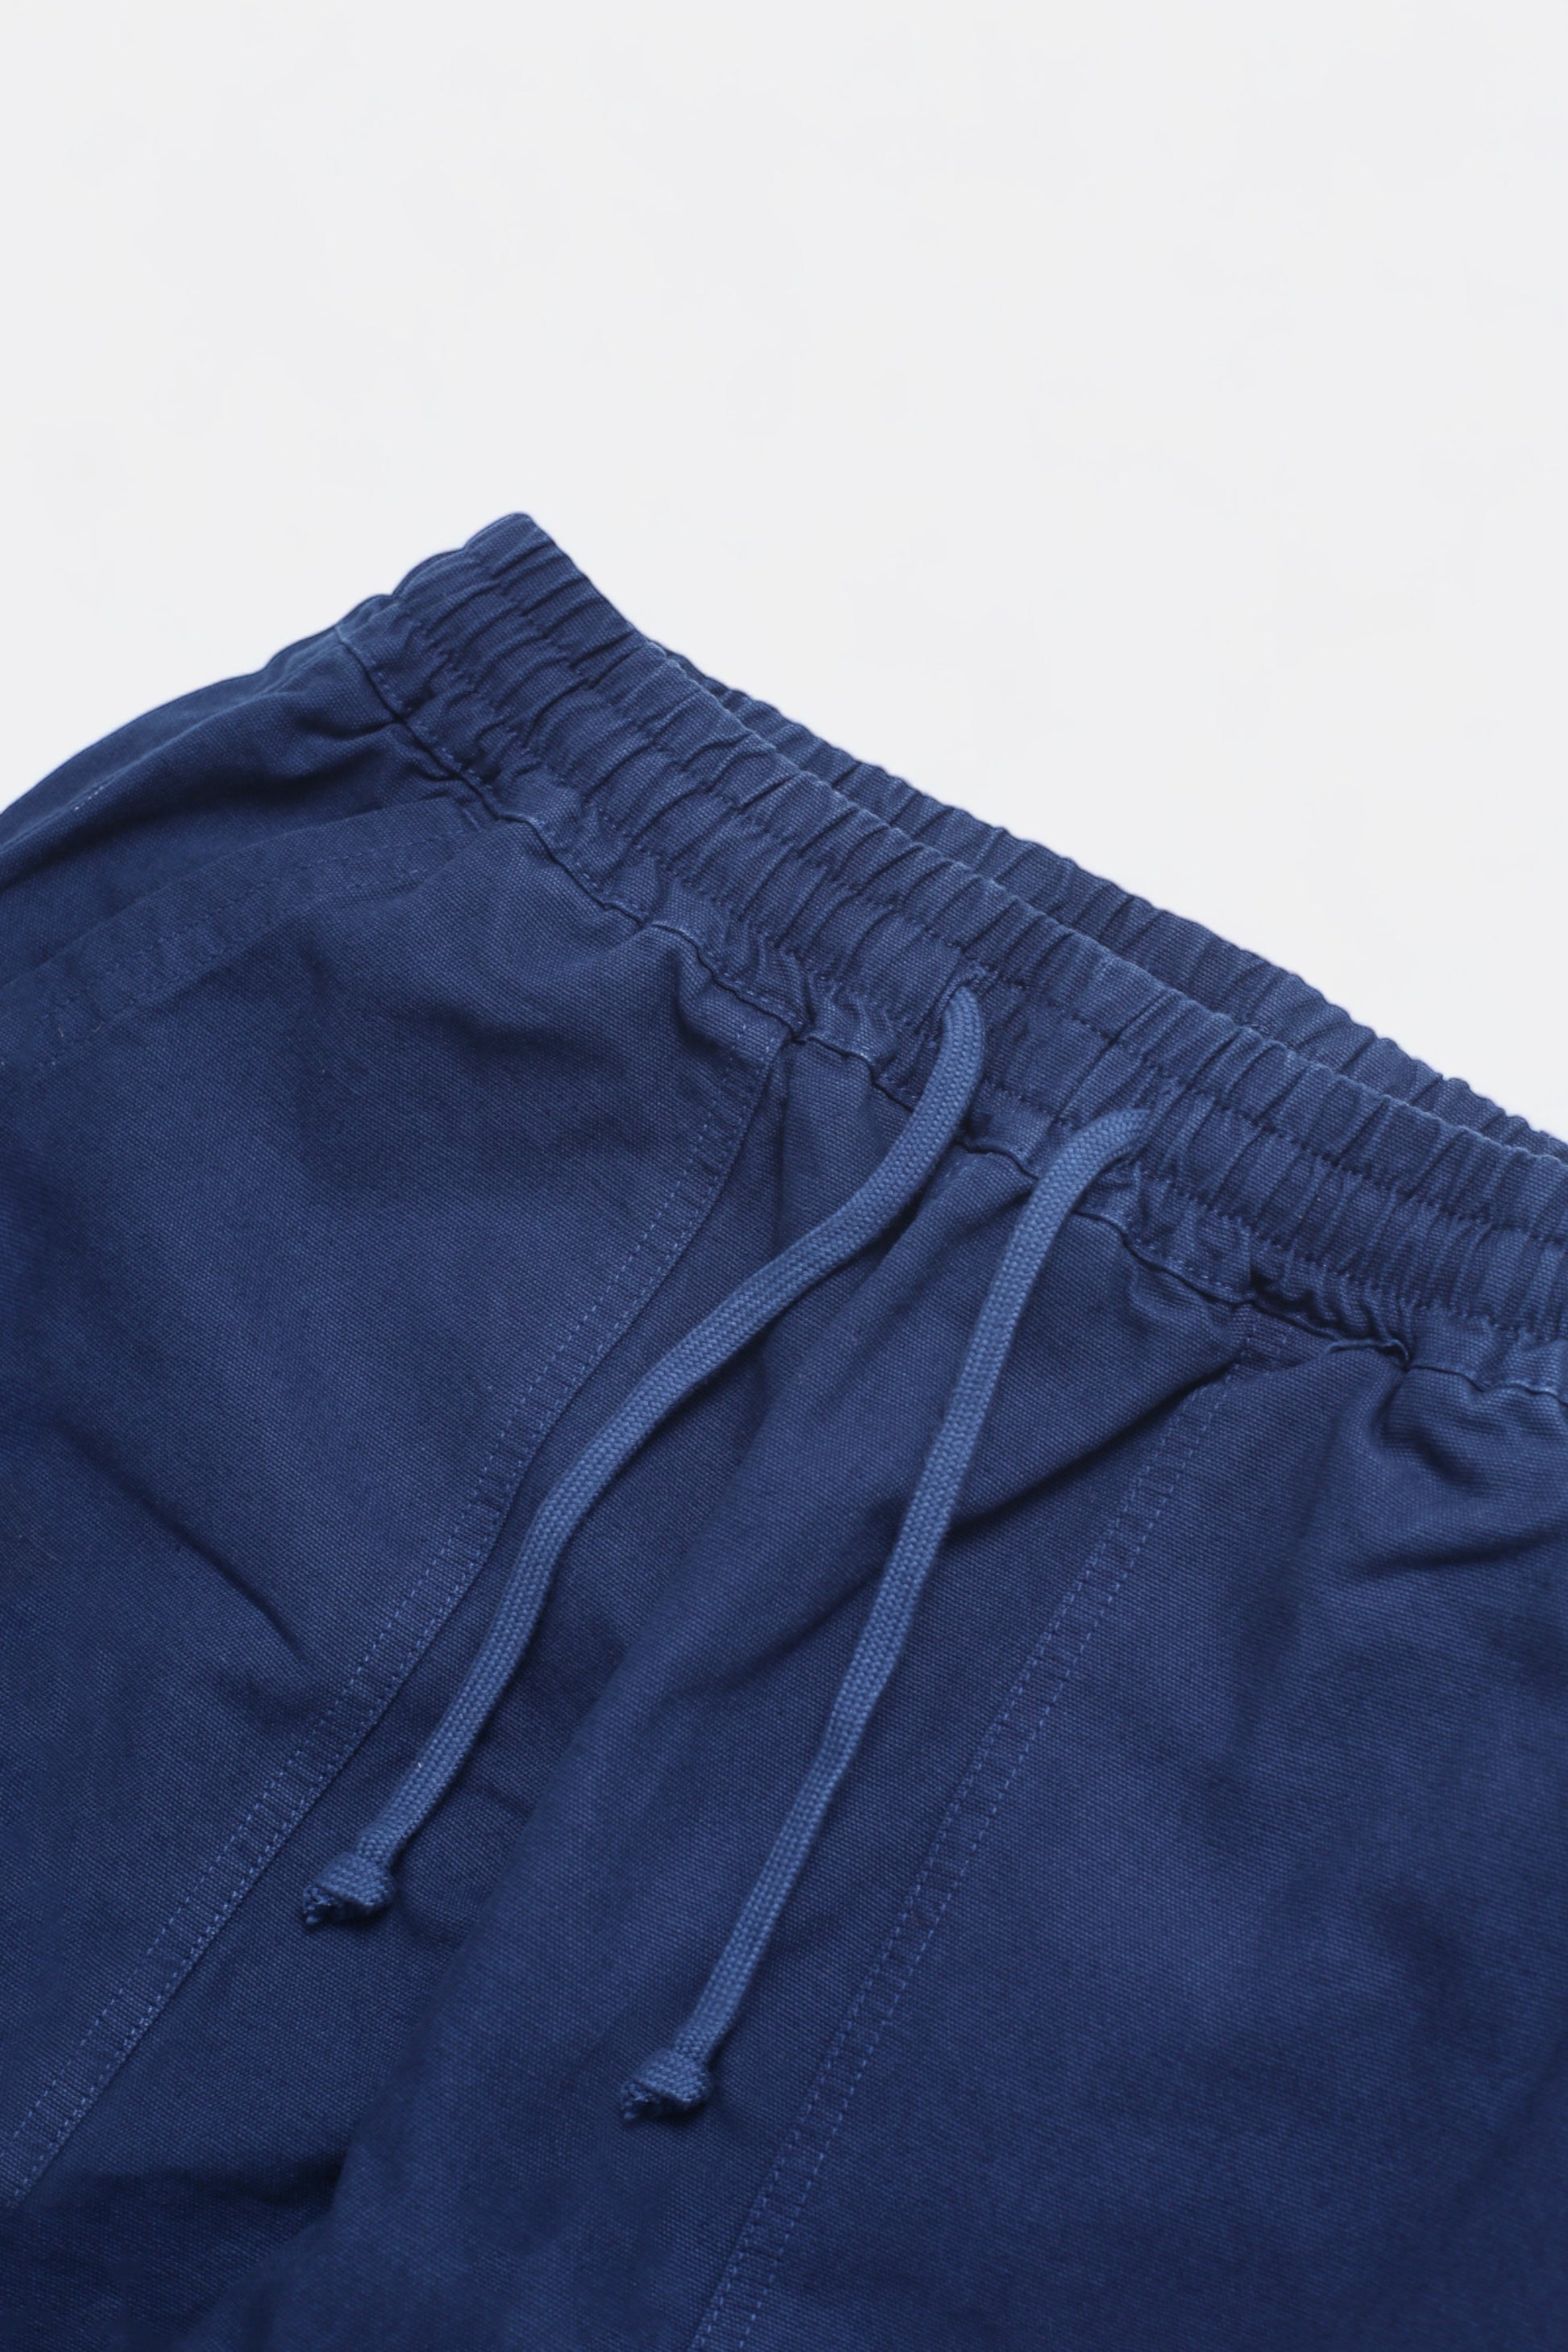 Service Works - Classic Chef Pants (Navy)